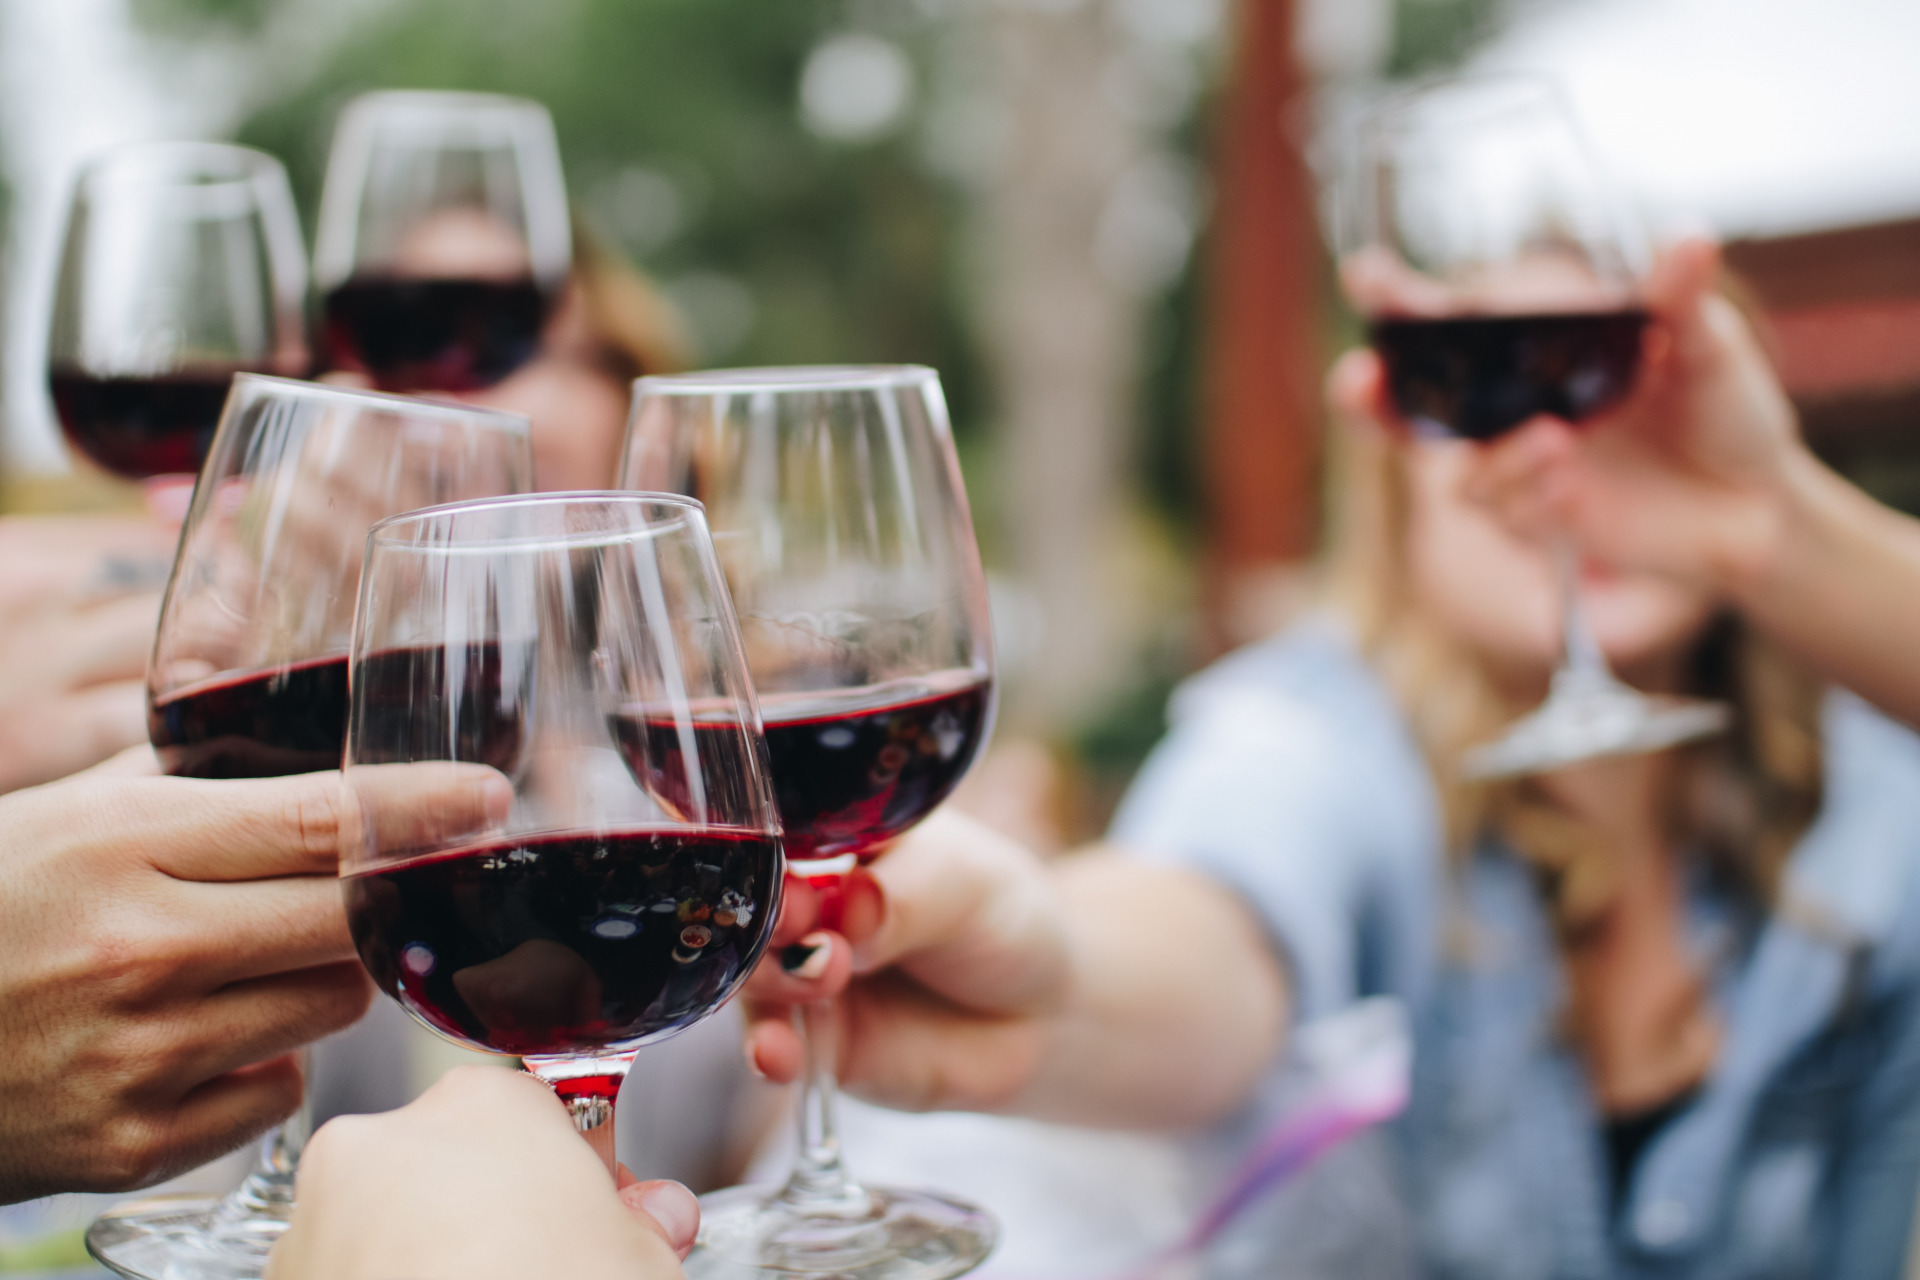 10 Unique Facts You Might Not Know About Wine